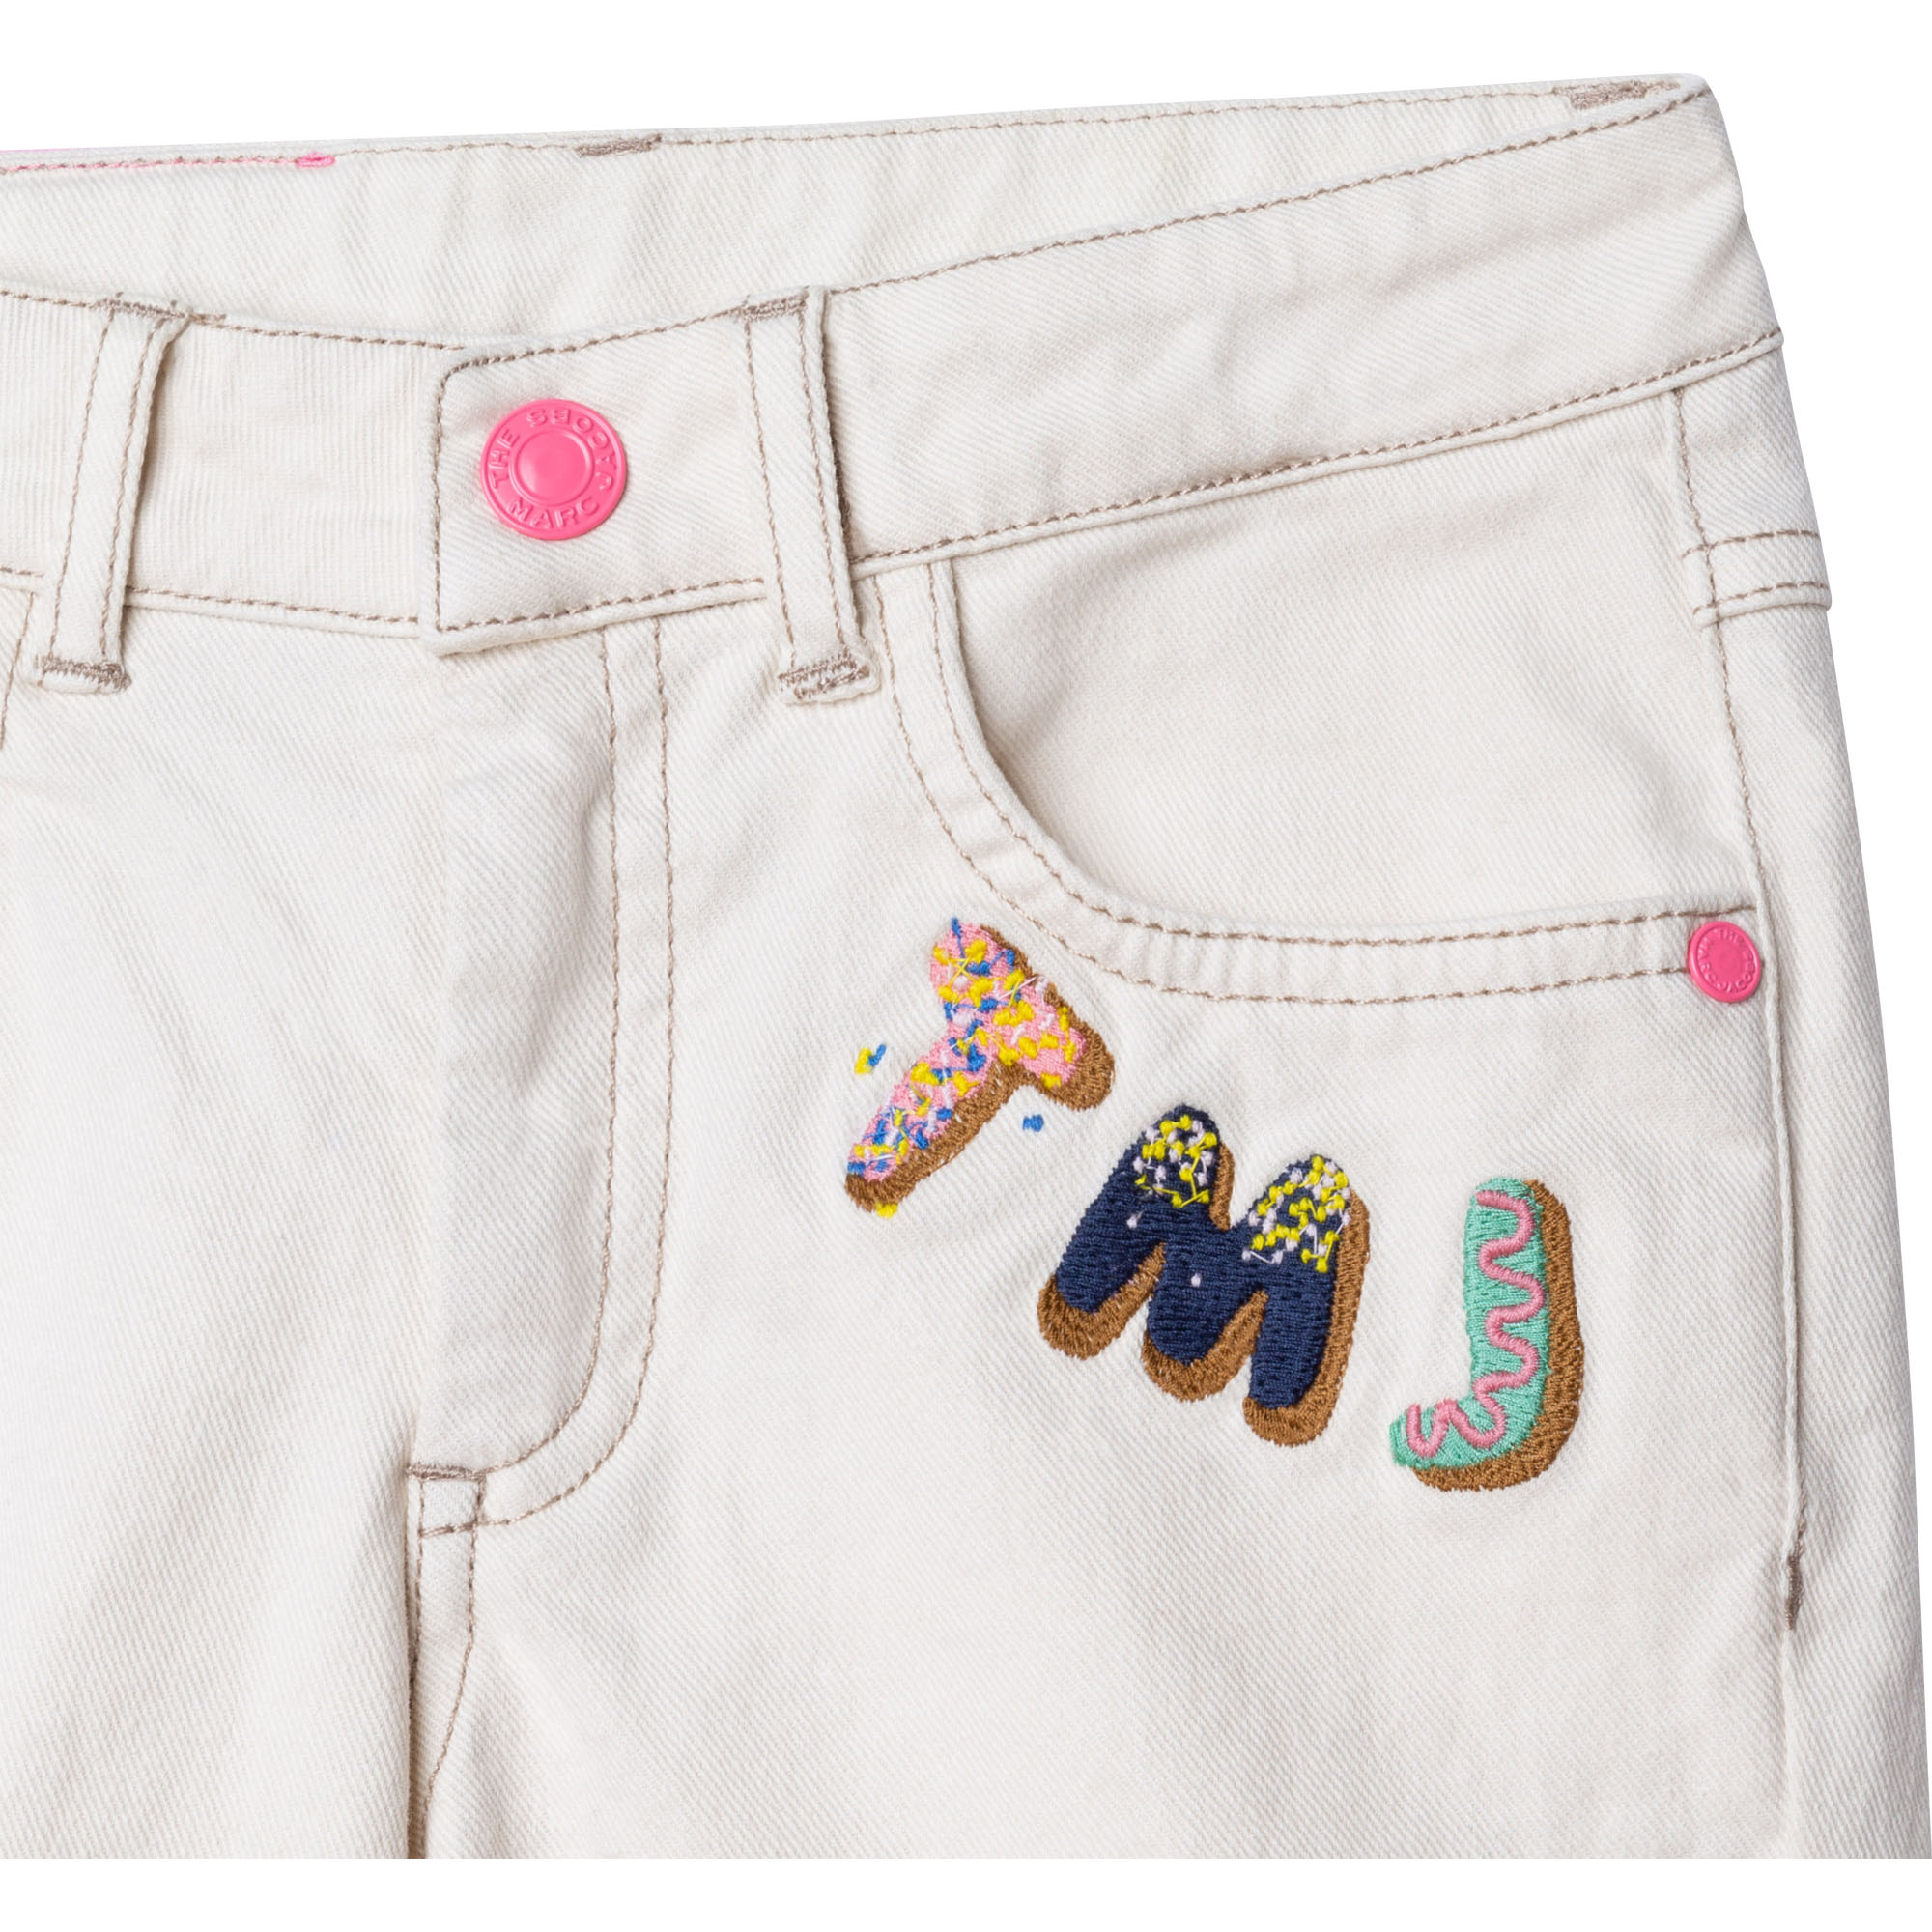 5-pocket twill trousers MARC JACOBS for GIRL